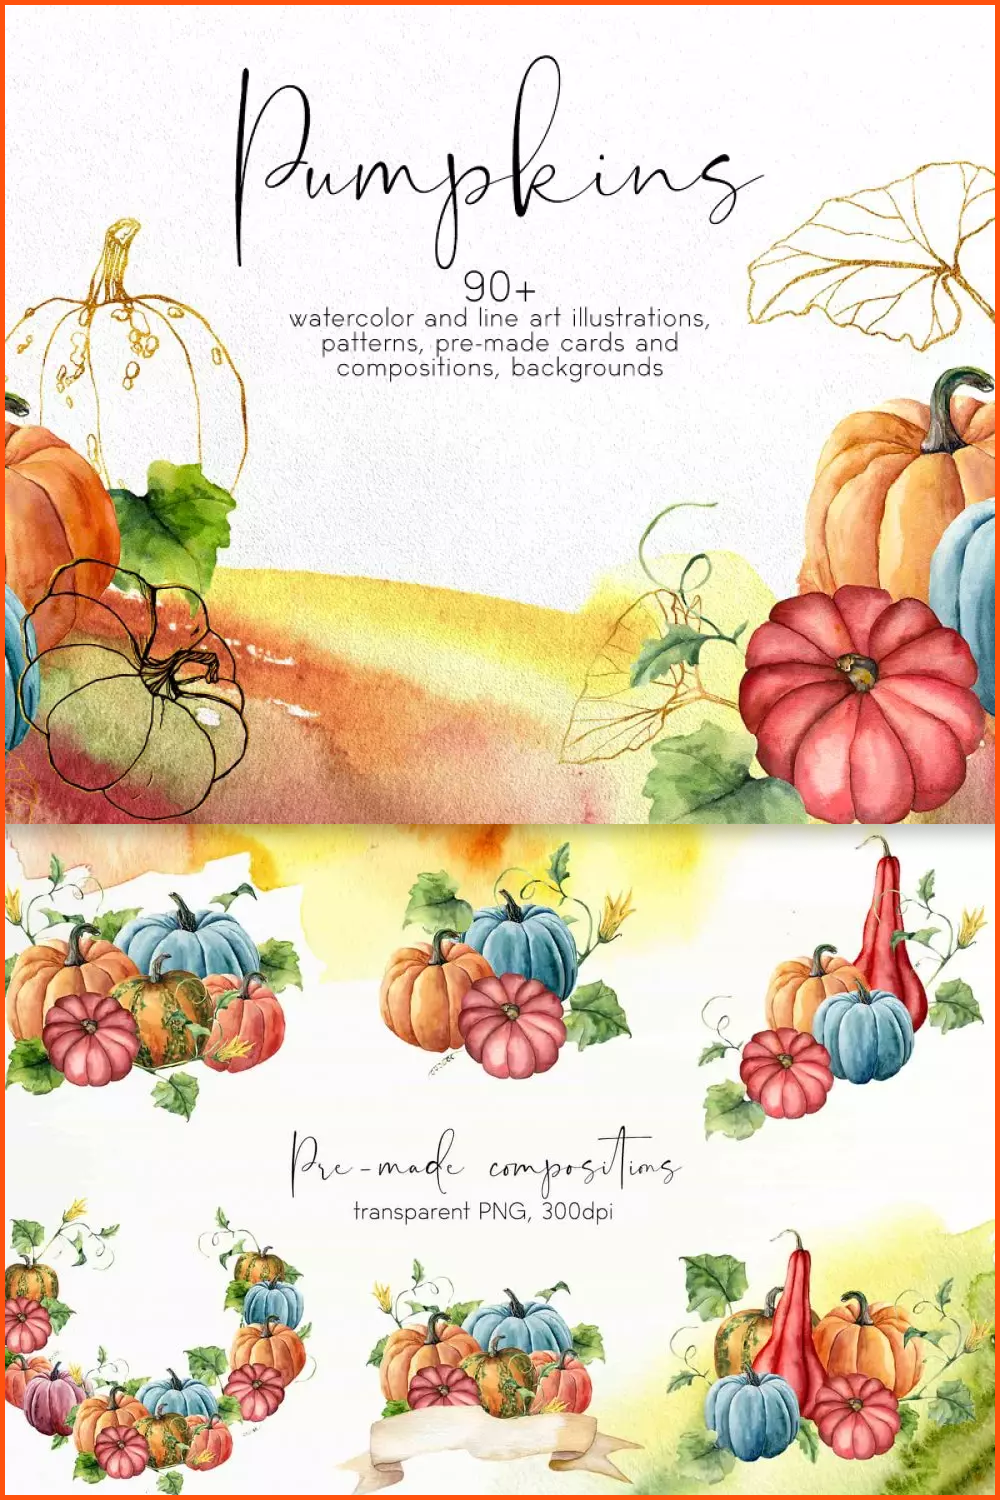 Images of bright pumpkins of different sizes, shapes and colors, painted in watercolor.